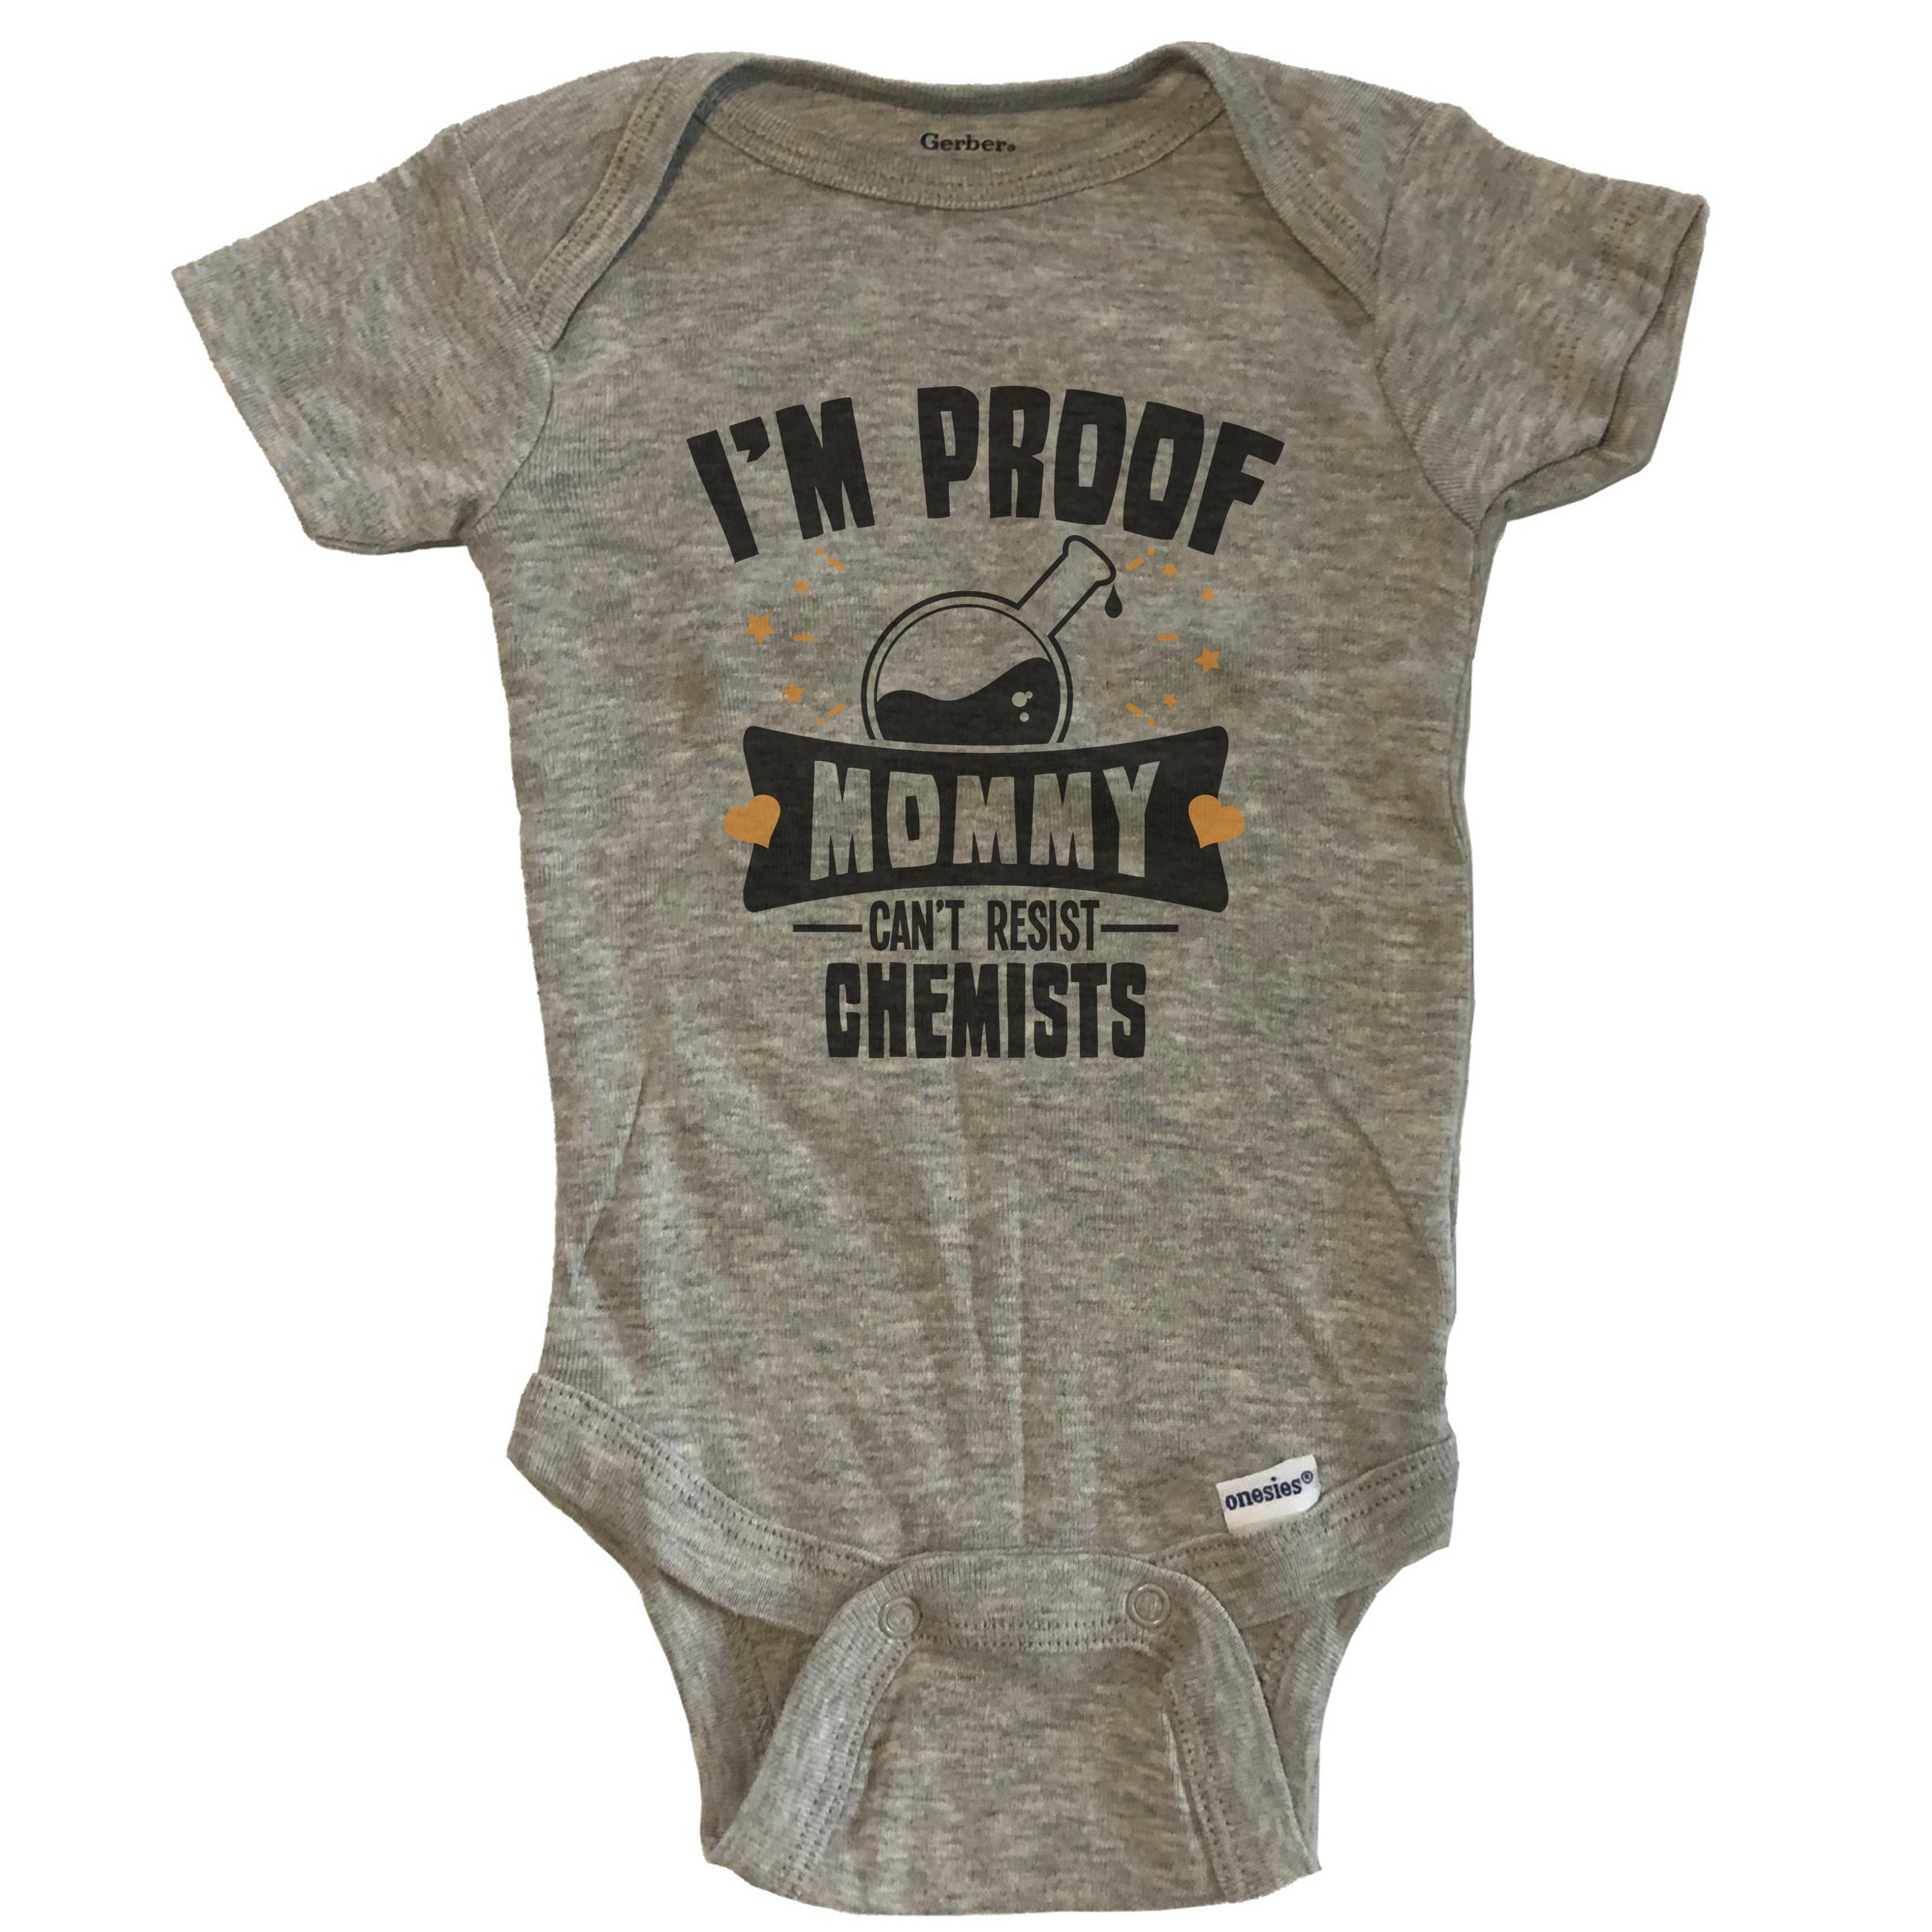 Details about   Funny Science Onesie I'm Proof Mommy Can't Resist Chemists Baby Bodysuit 